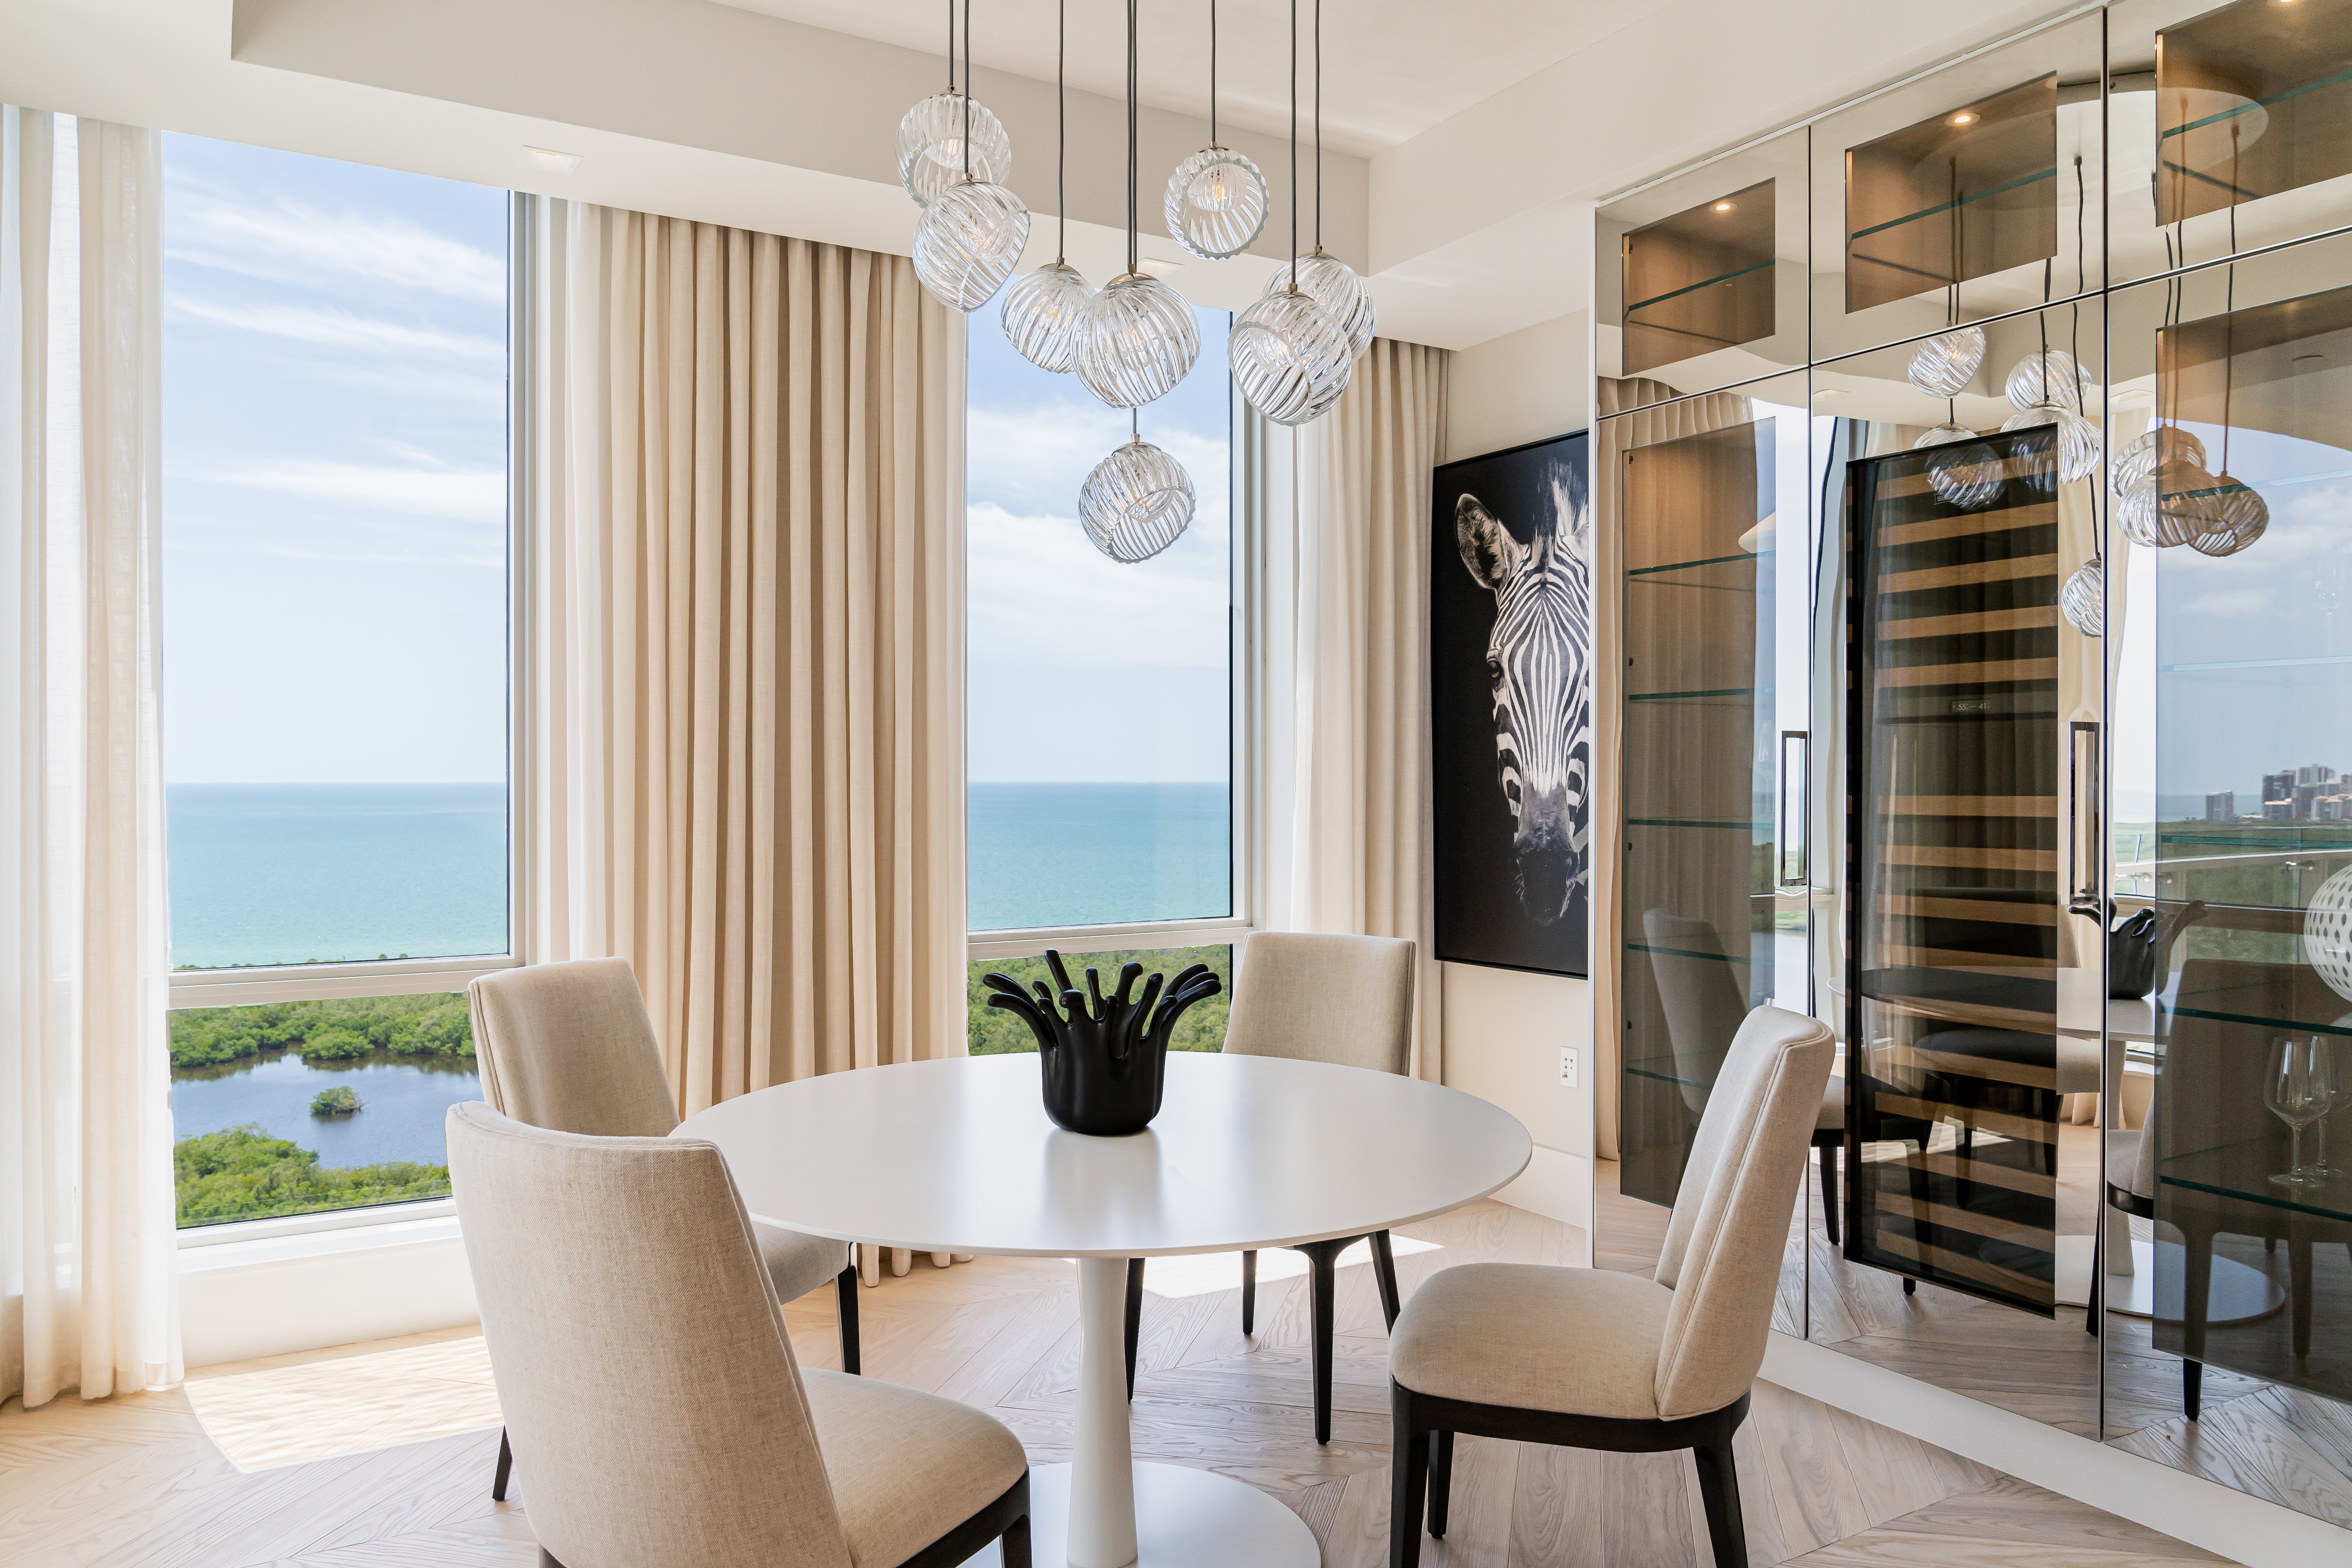 9 Tips to Buying a Luxury Condo